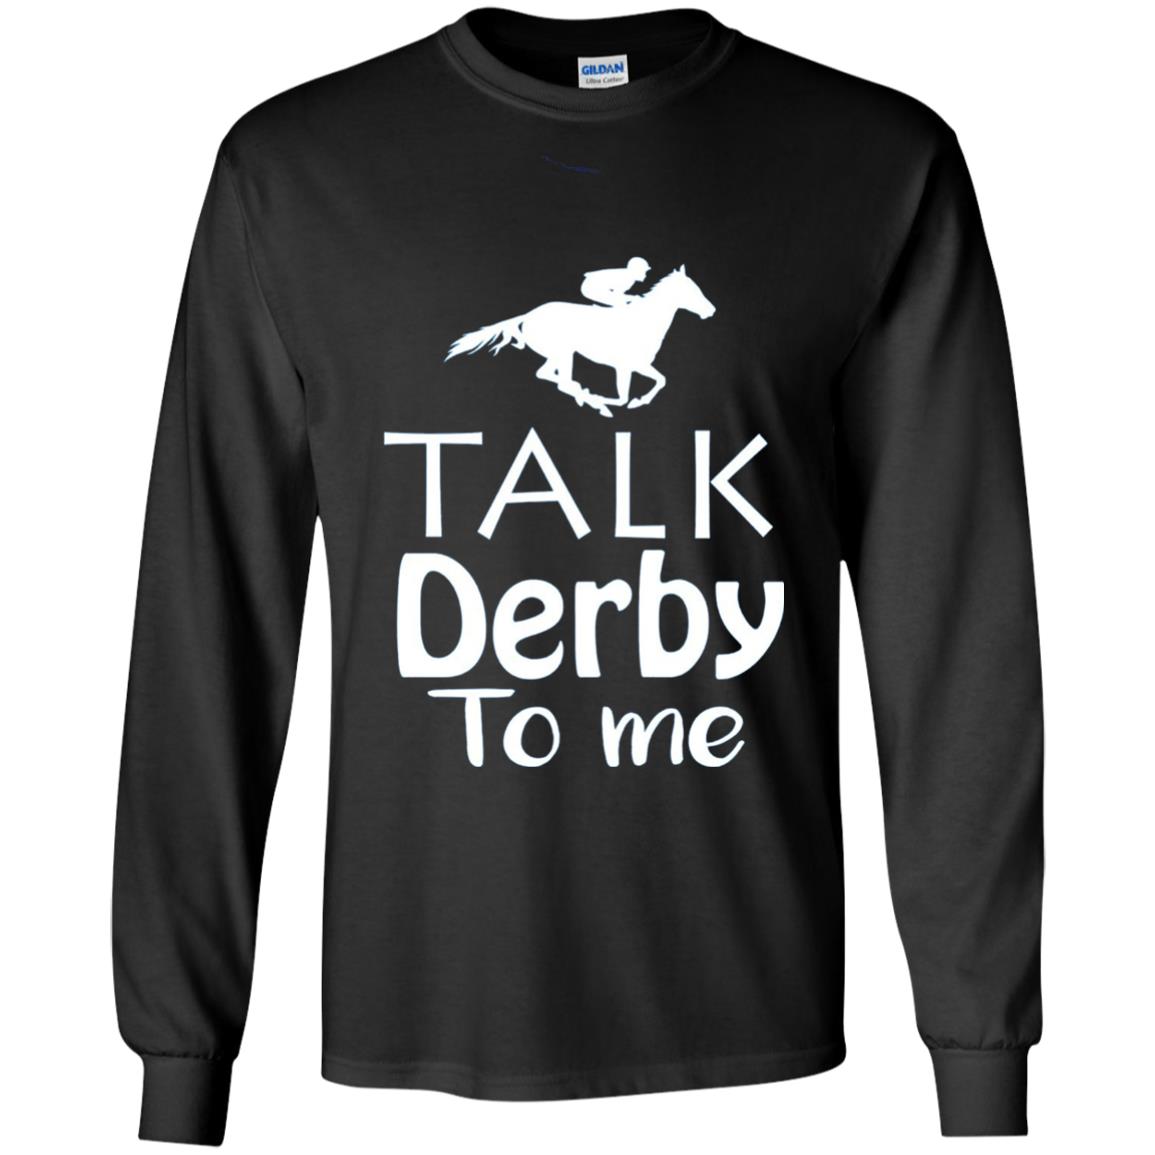 Talk Derby To Me Funny Derby Horse Racing Festival T-shirt